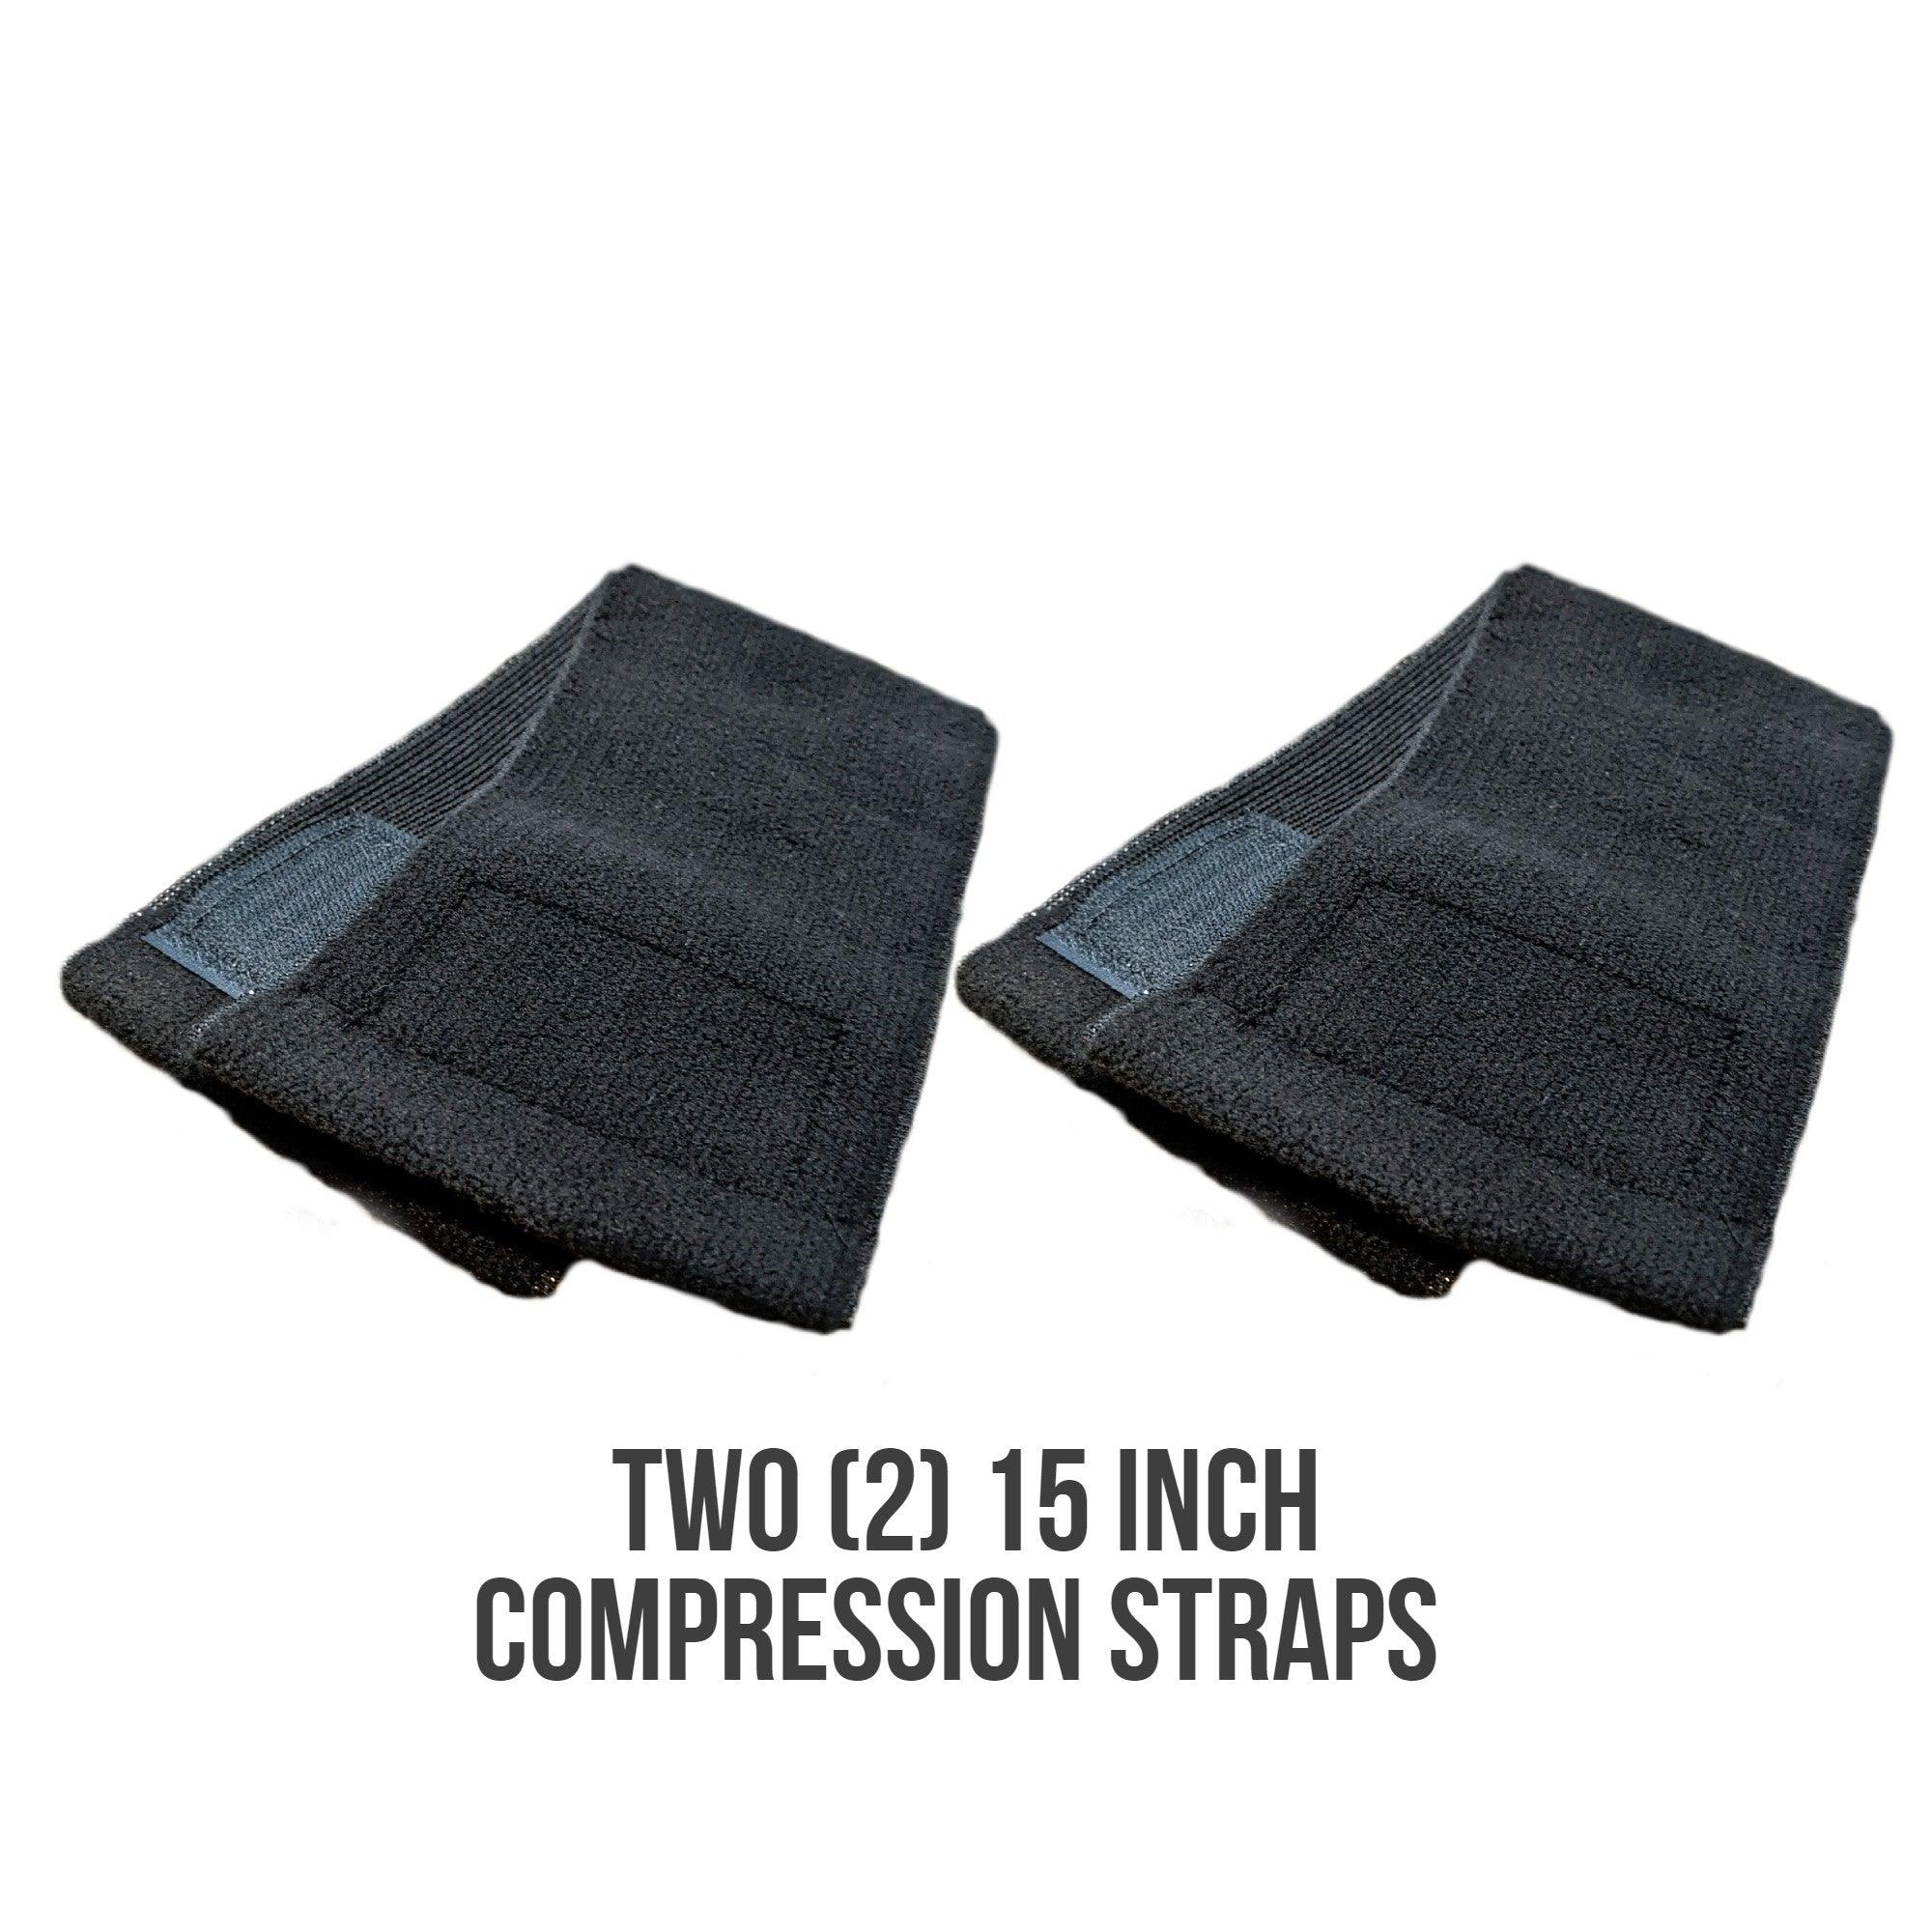 Shop 5 Compression Straps products at Supply Physical Therapy ⭐ Shop Compression  Straps Now 👉